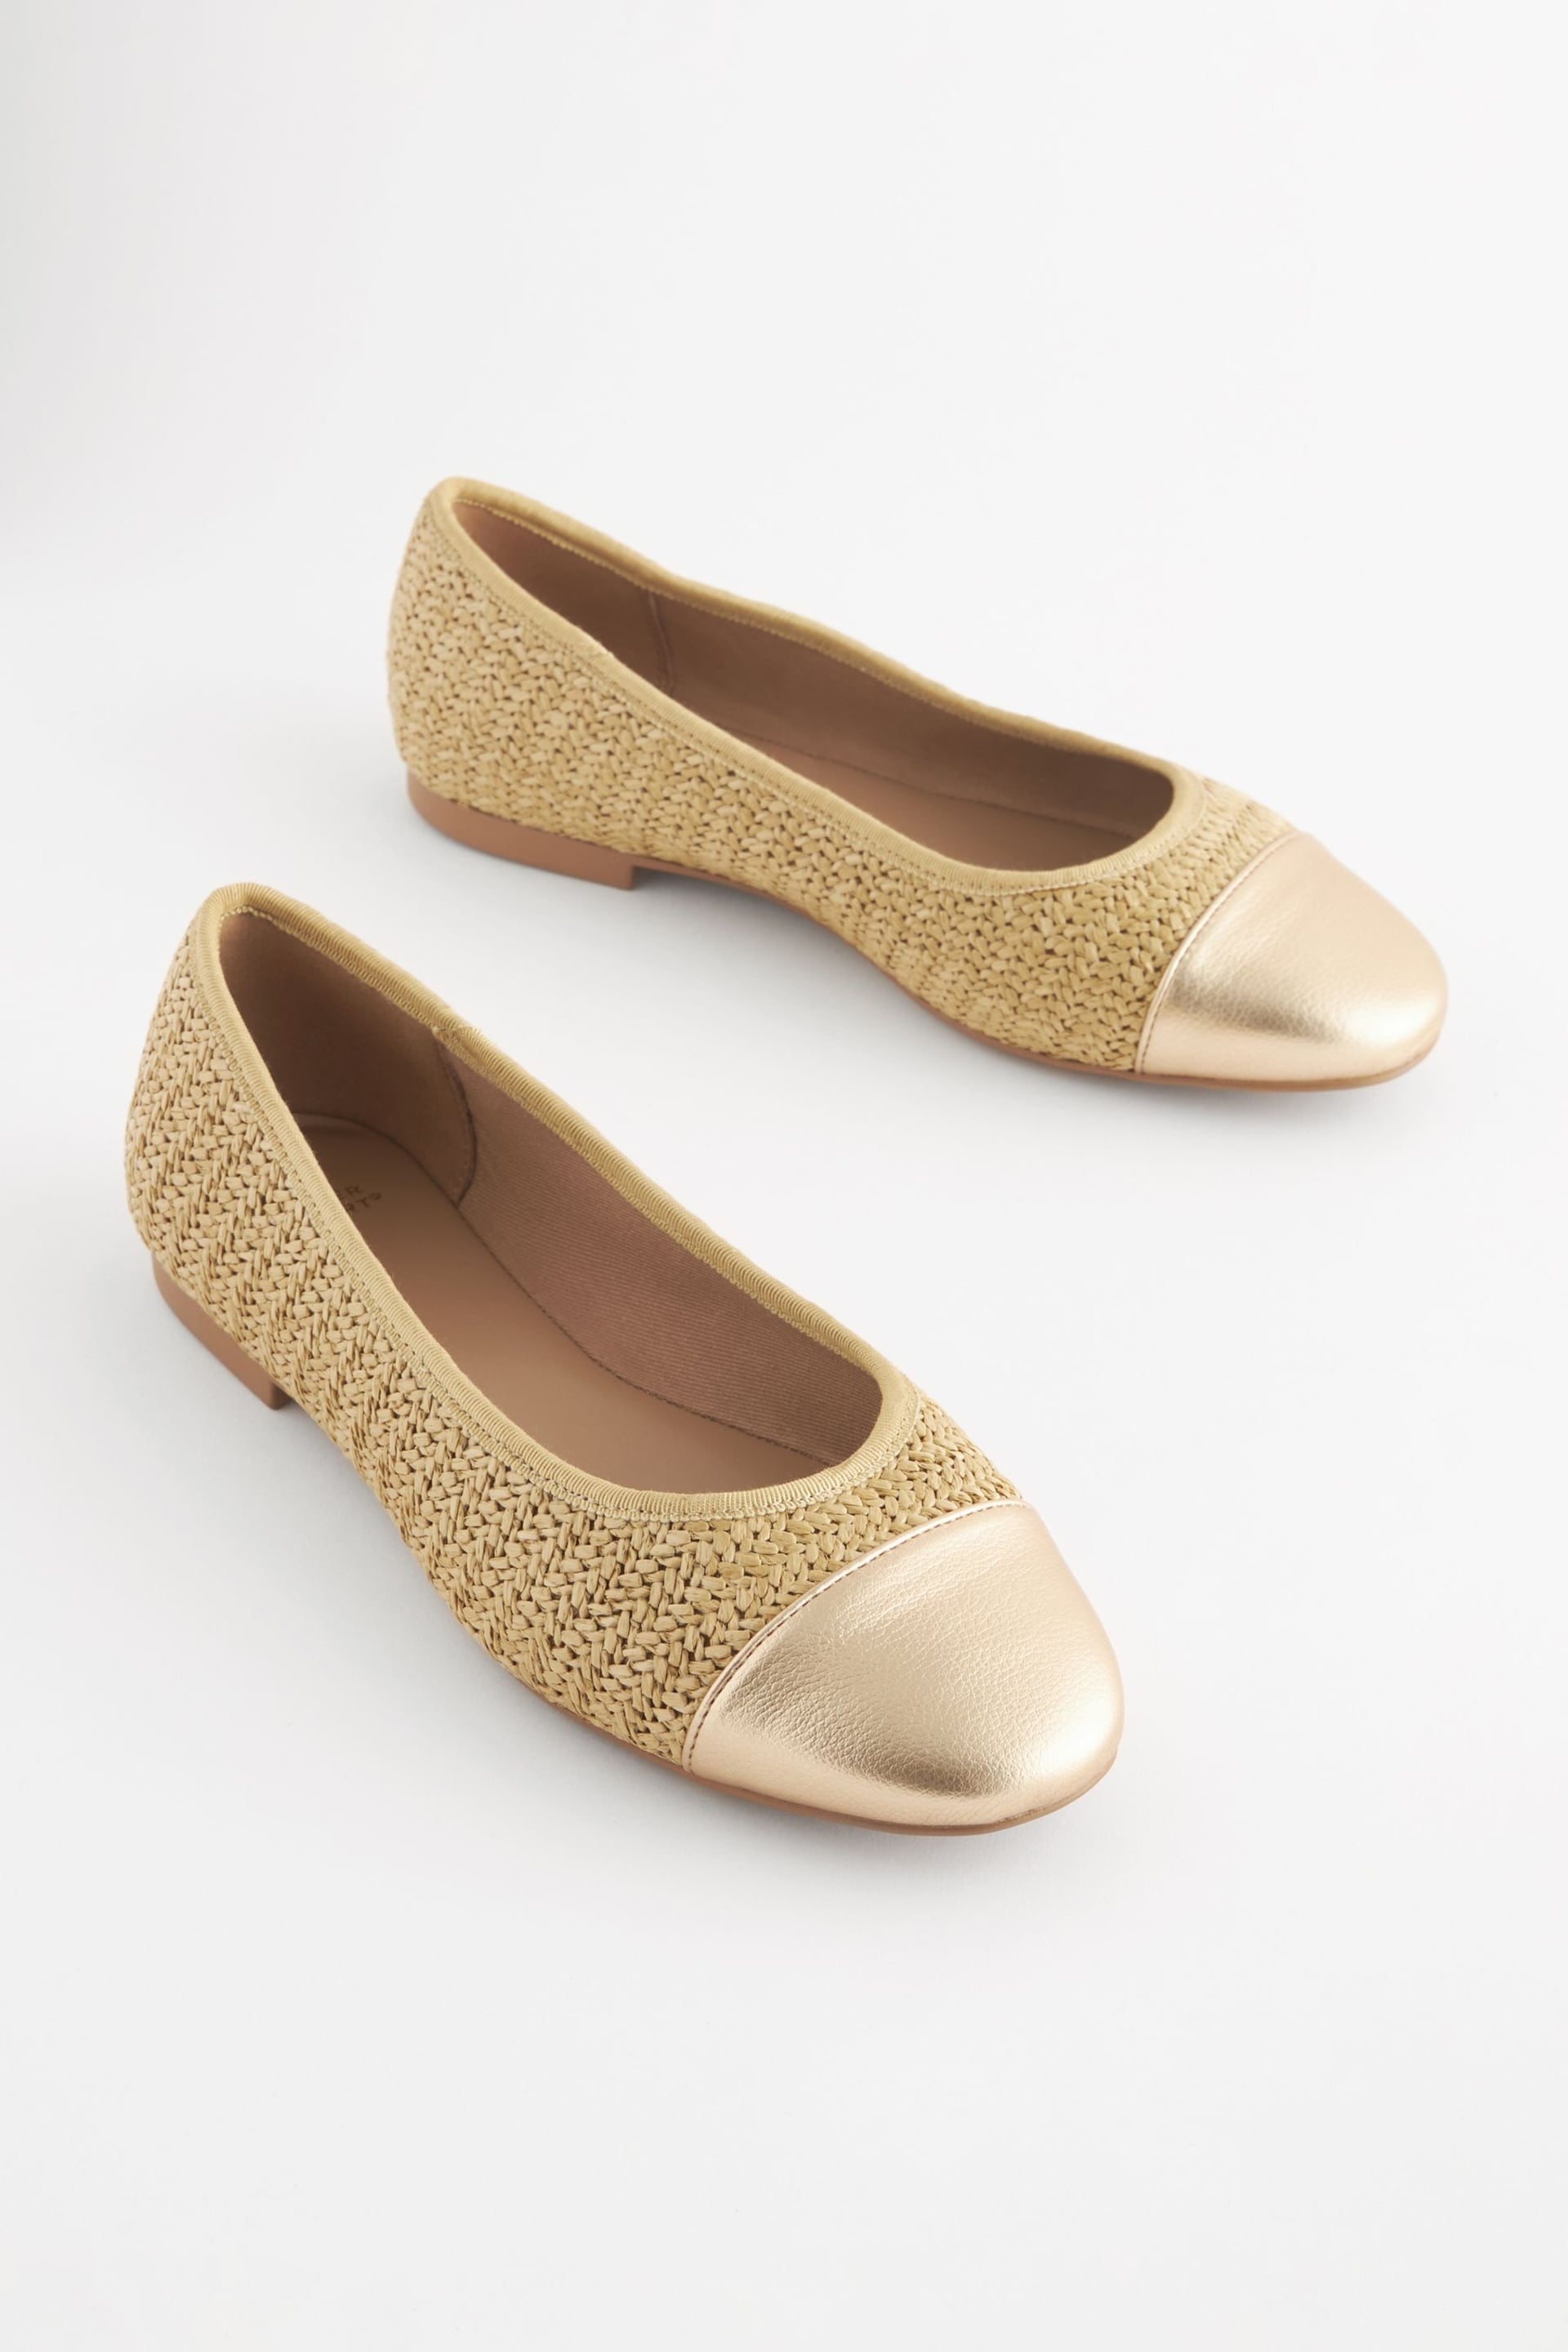 Natural/Gold Extra Wide Fit Forever Comfort® Ballerinas Shoes - Image 1 of 3